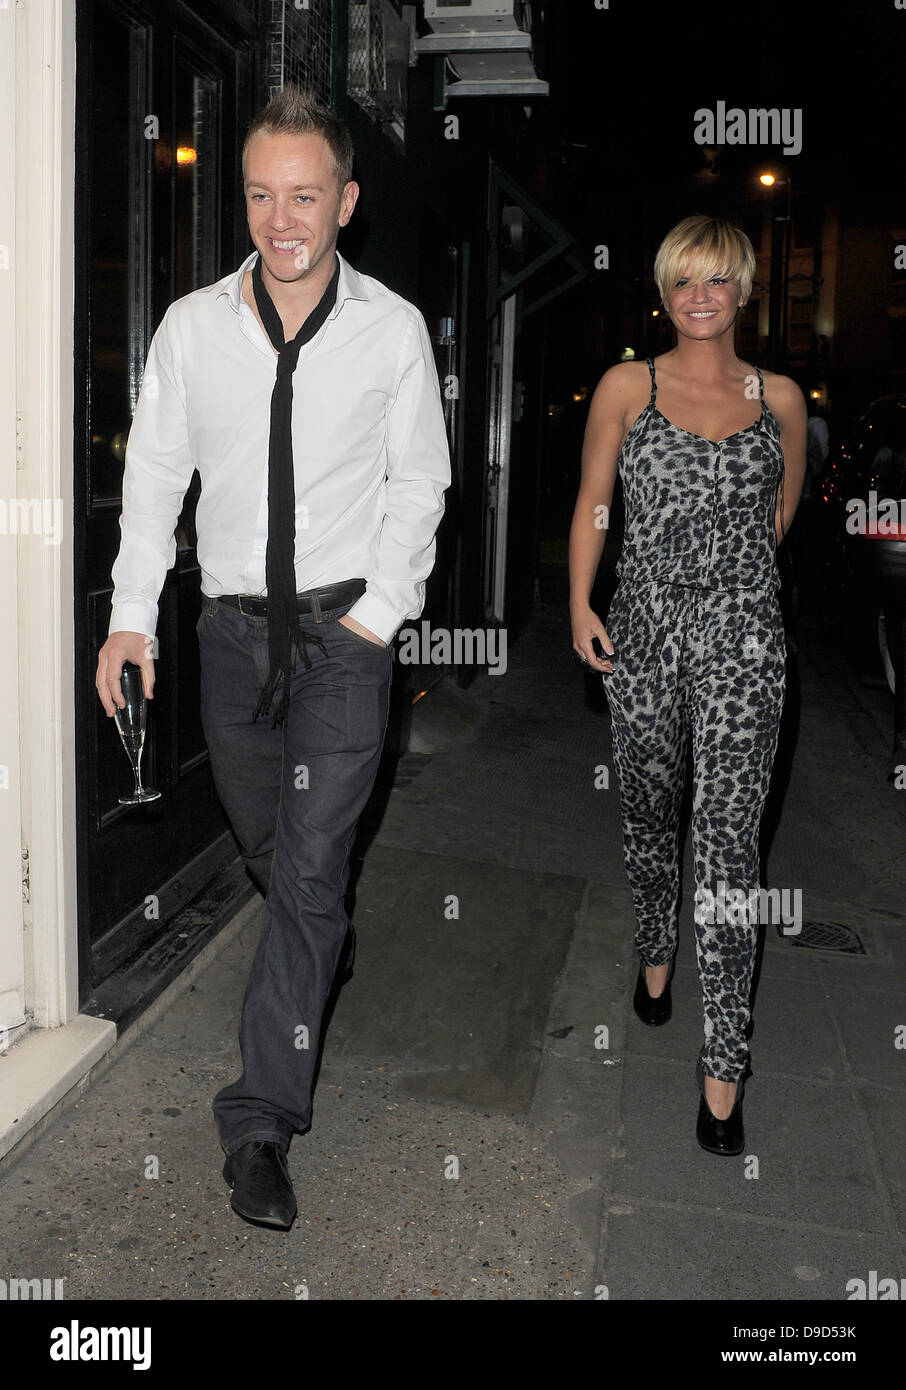 Kerry Katona and Daniel Whiston arriving at a private party in Chelsea. London, England - 24.03.11 Stock Photo